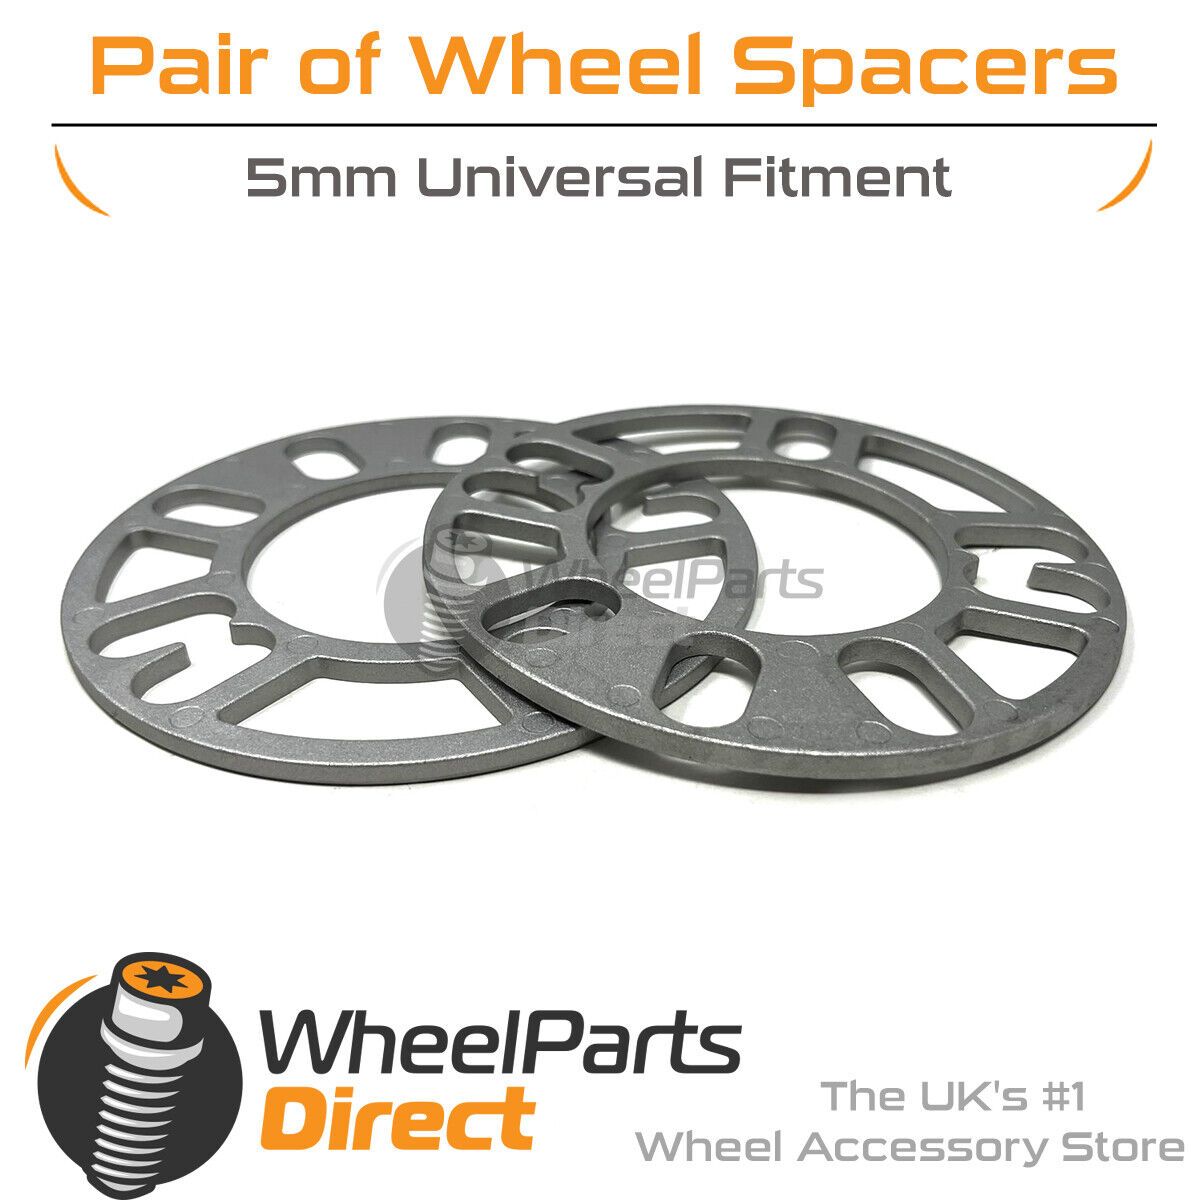 Wheel Spacers (2) 5mm Universal for Peugeot 206 98-10